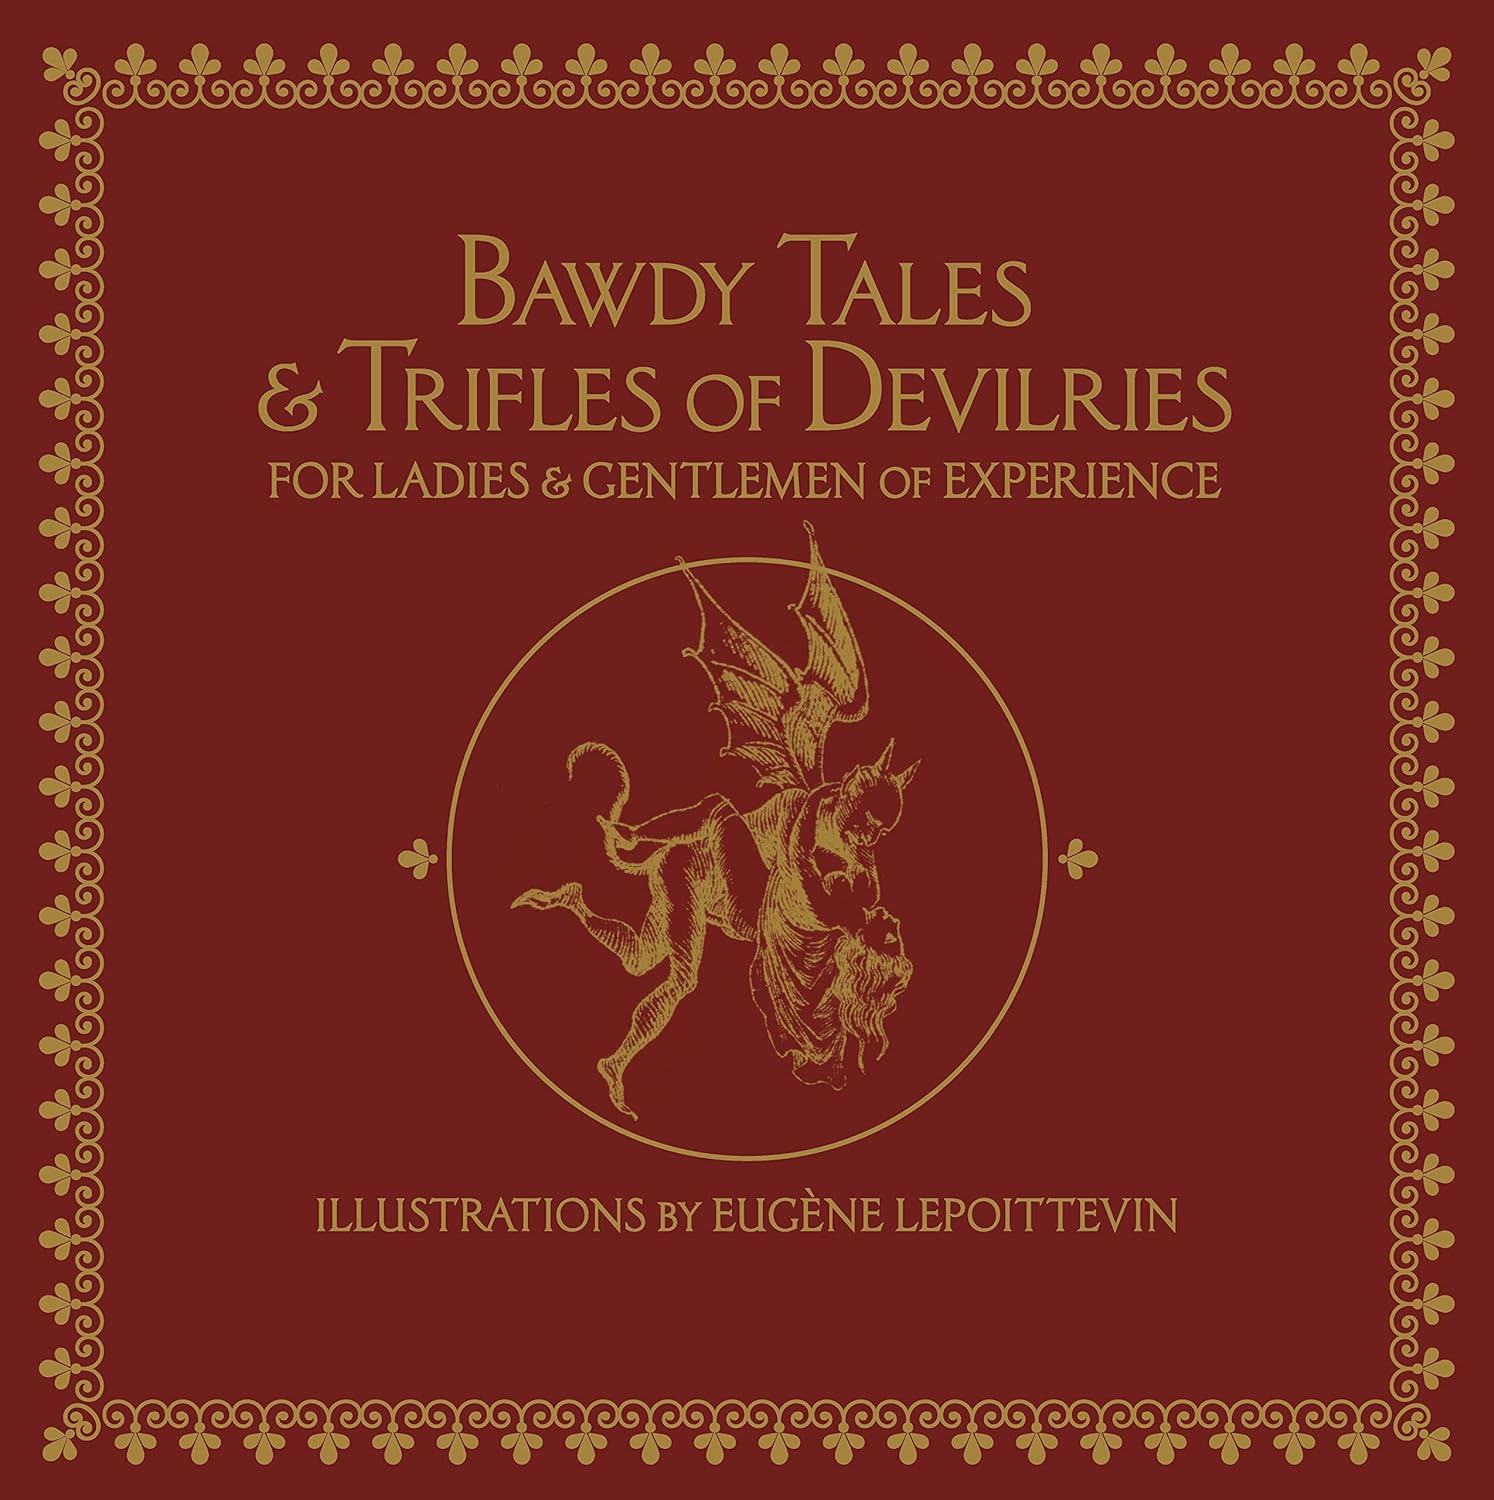 Fanny Woodcock, Eugène Lepoittevin, Sarah Burns: Bawdy Tales and Trifles of Devilries for Ladies and Gentlemen of Experience (2021, Feral House)